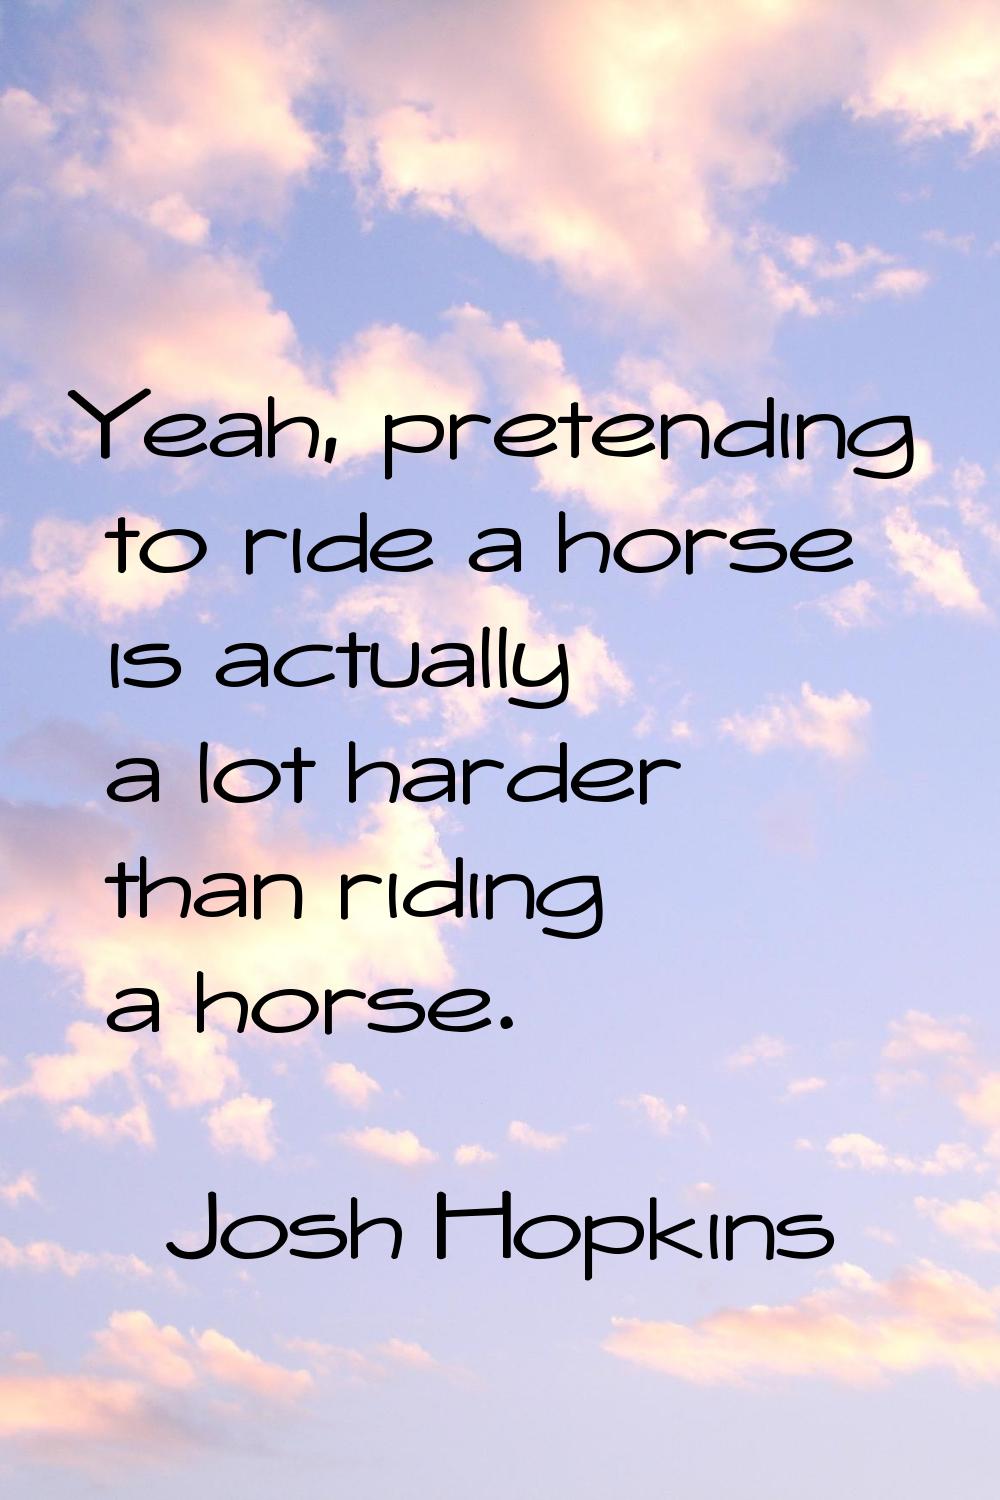 Yeah, pretending to ride a horse is actually a lot harder than riding a horse.